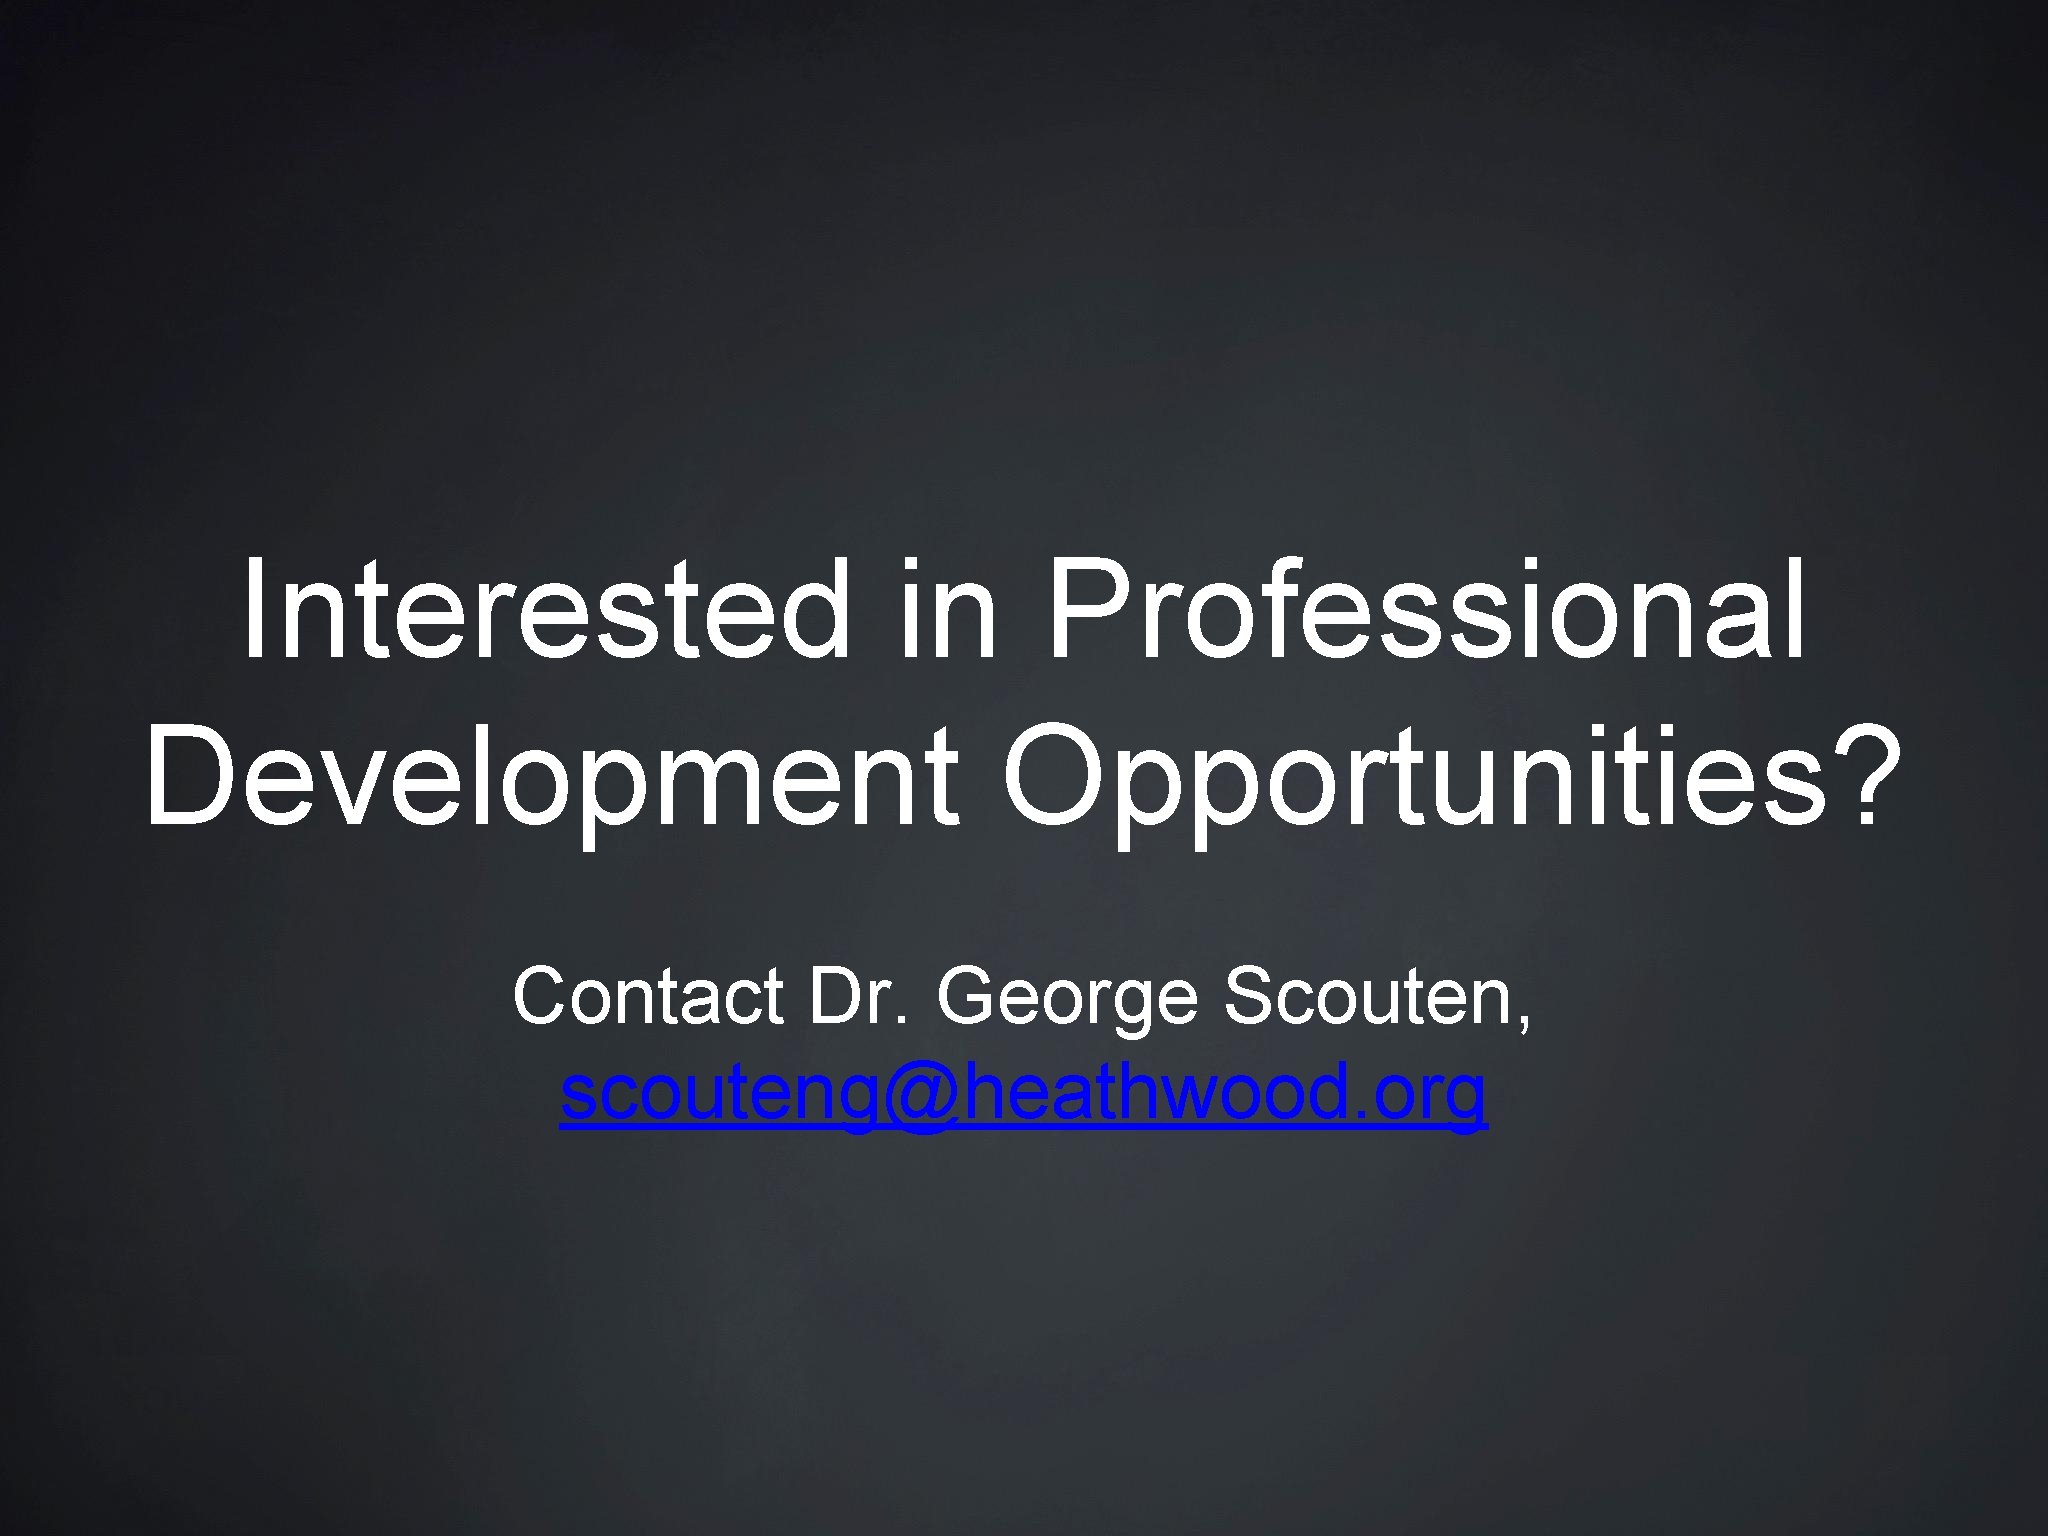 Interested in Professional Development Opportunities? Contact Dr. George Scouten, scouteng@heathwood. org 